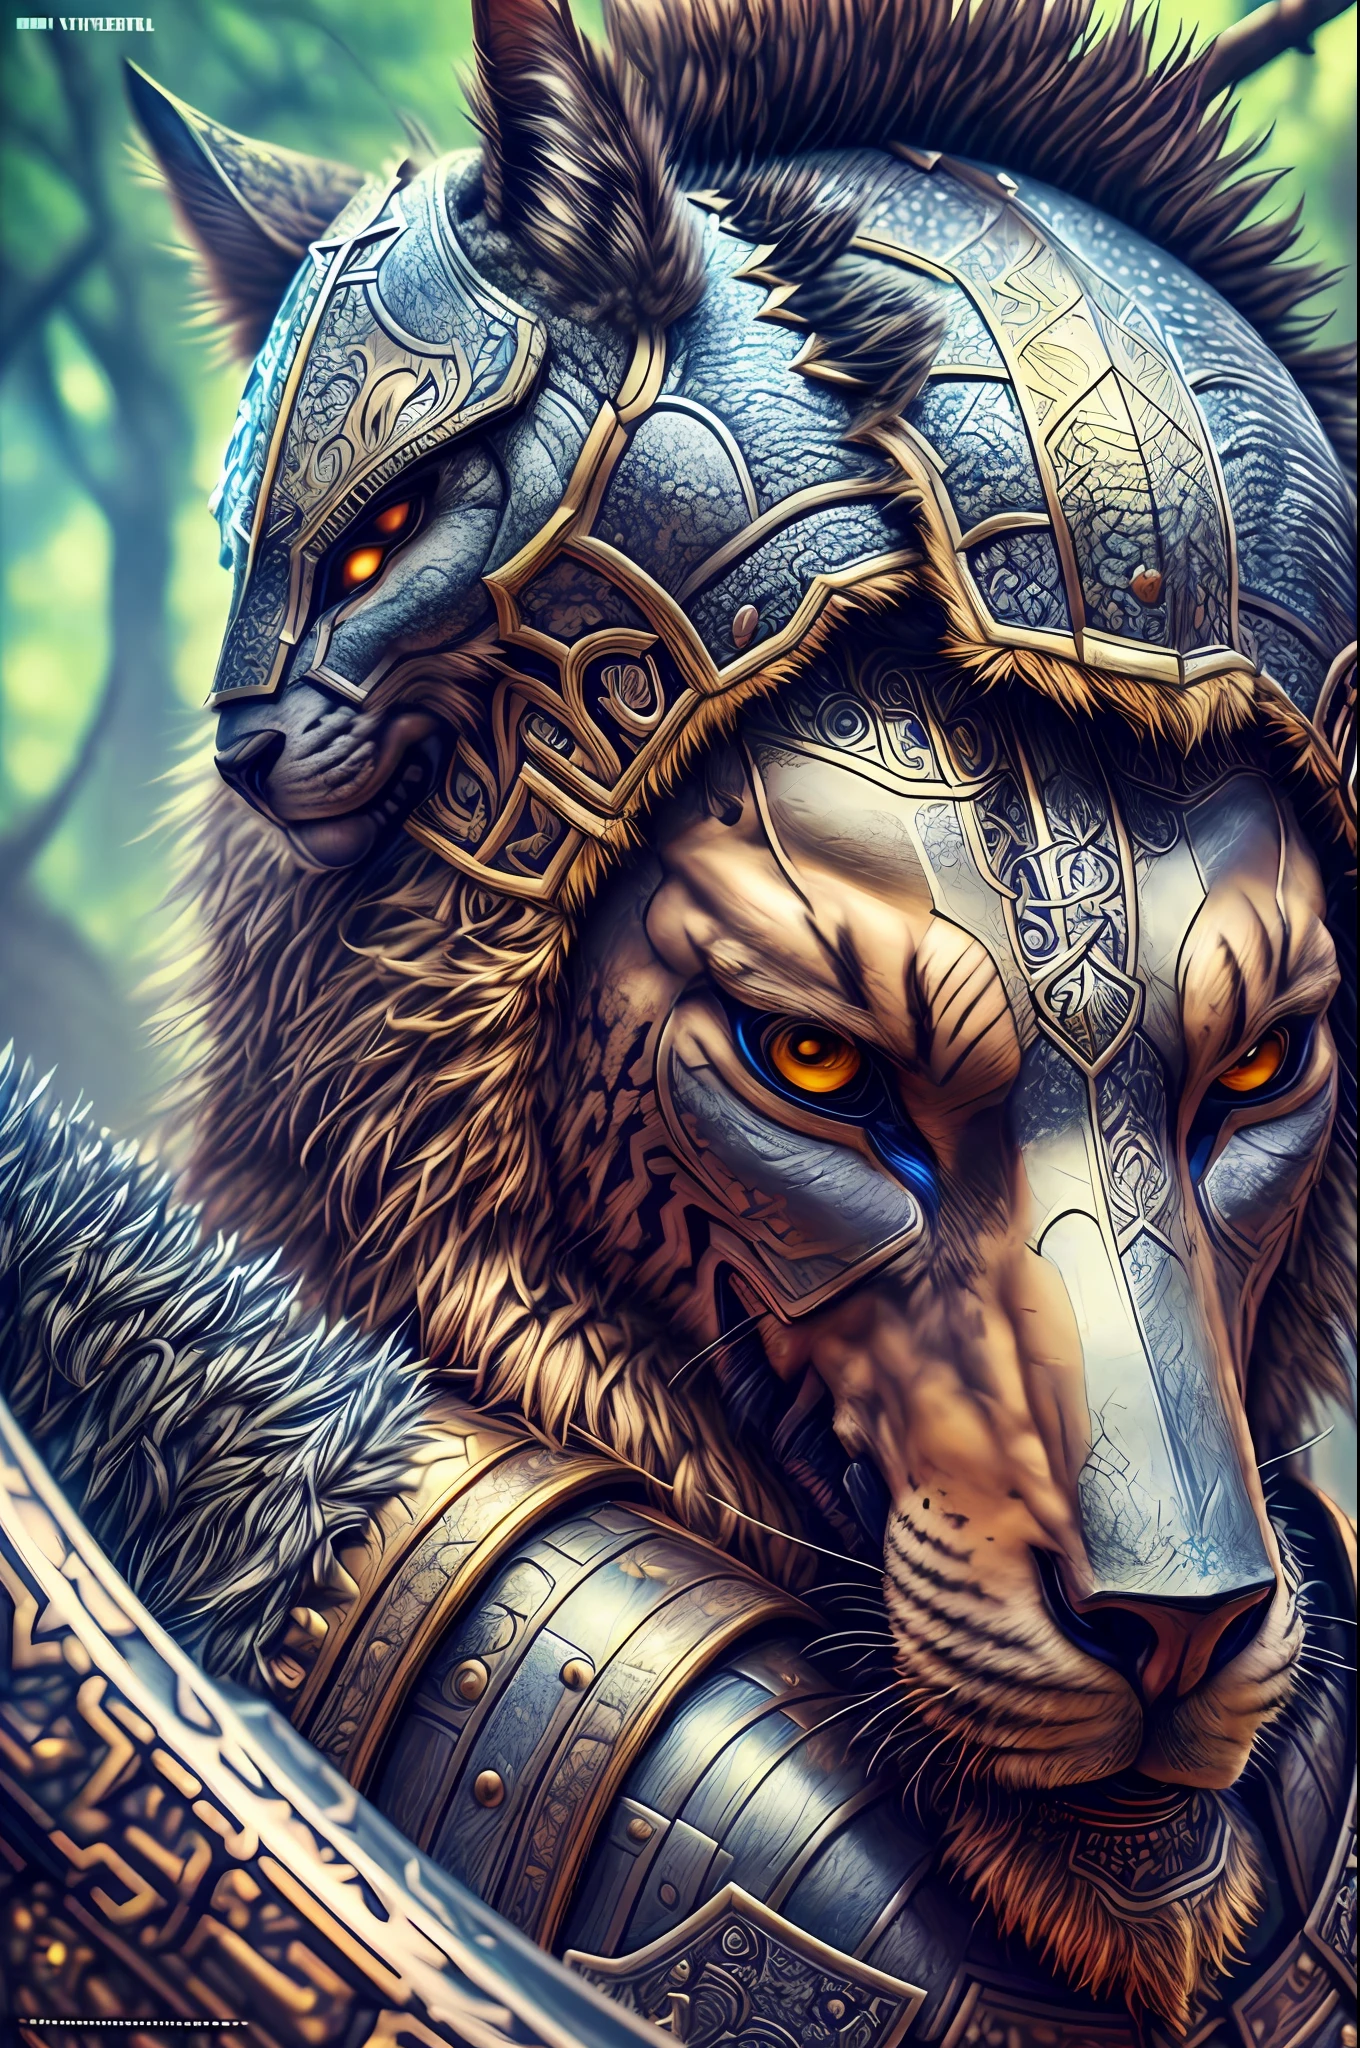 Warrior image of an animal，Portrait of an animal in armor holding a weapon，combats，tmasterpiece，hyper-high detail，HighestQuali，Ultra-high resolution，rim-light，Realistic textures and textures，realistic scene，cinematic Film still from。